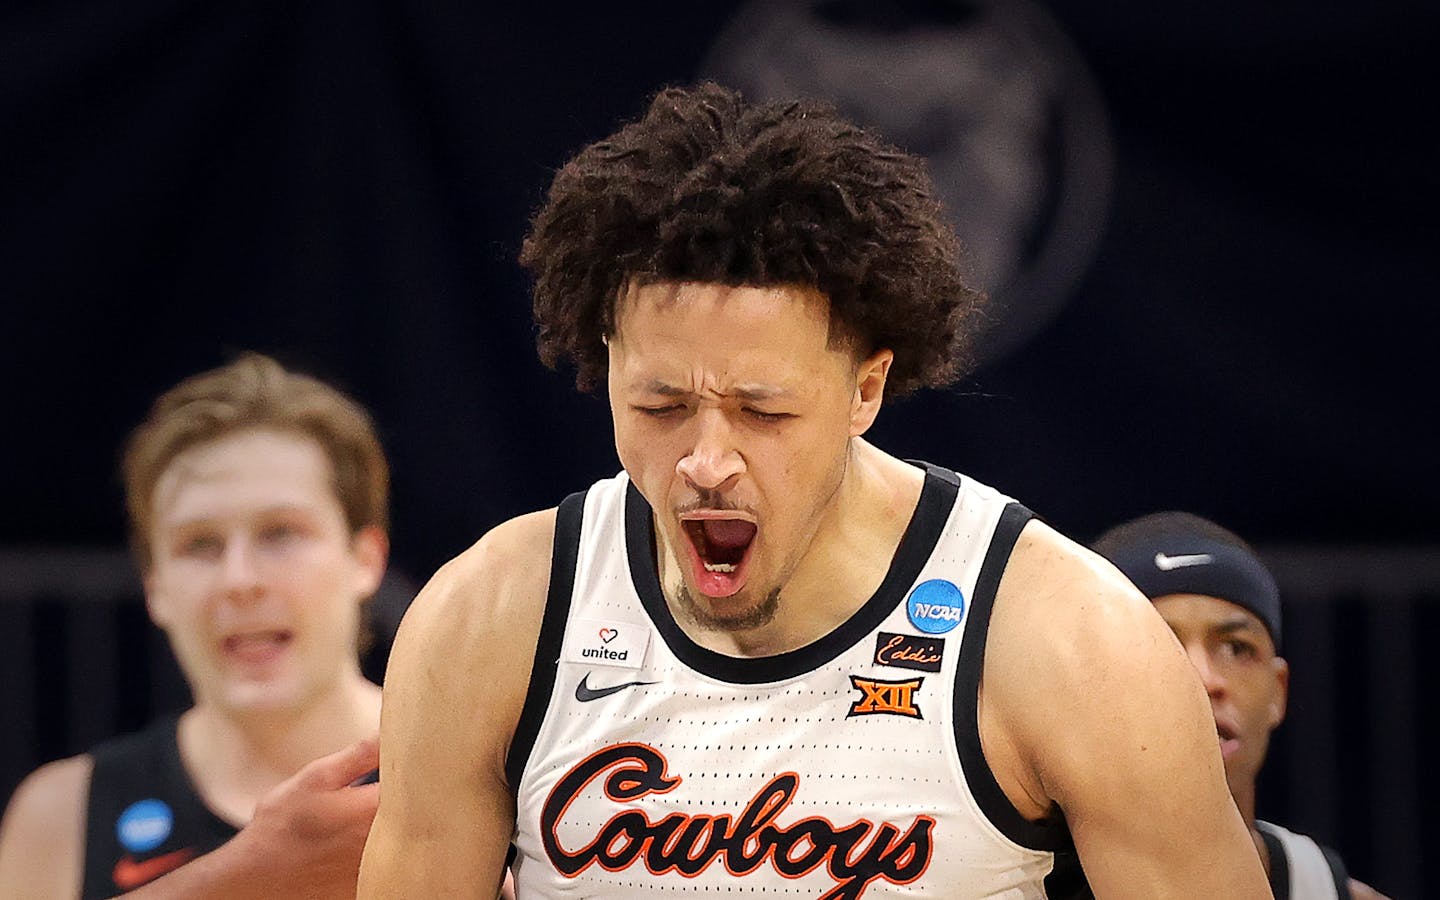 NBA Draft: What to know about Cade Cunningham, likely No. 1 pick for Pistons